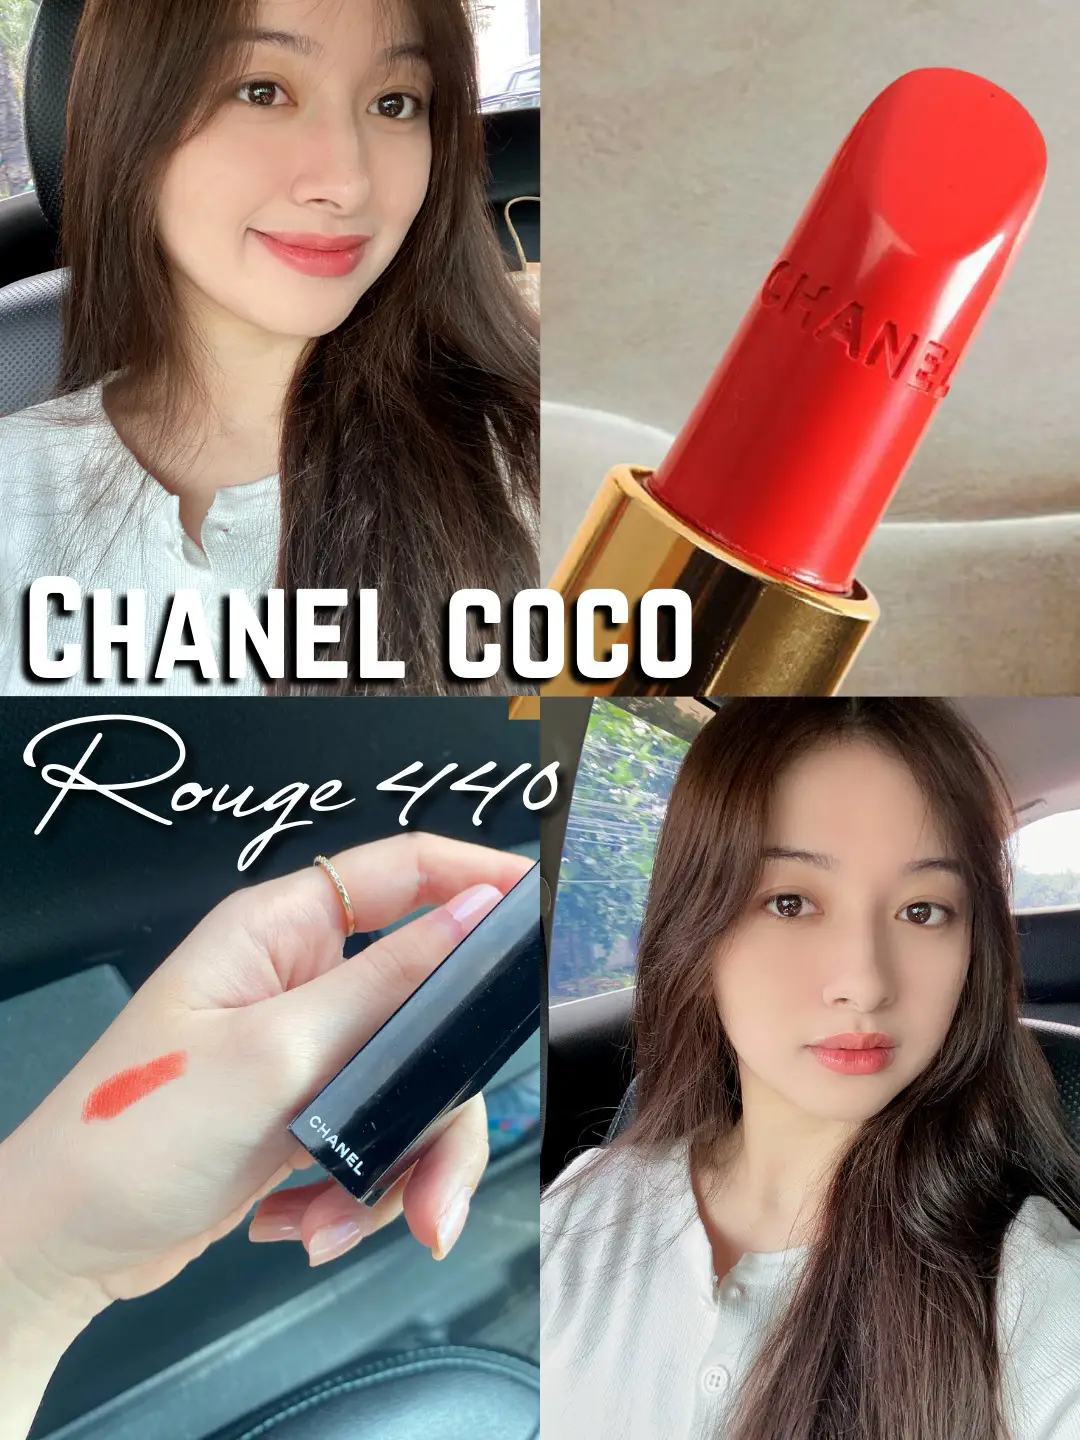 Chanel COCO Rouge 440 😍✨, Gallery posted by Regienashael